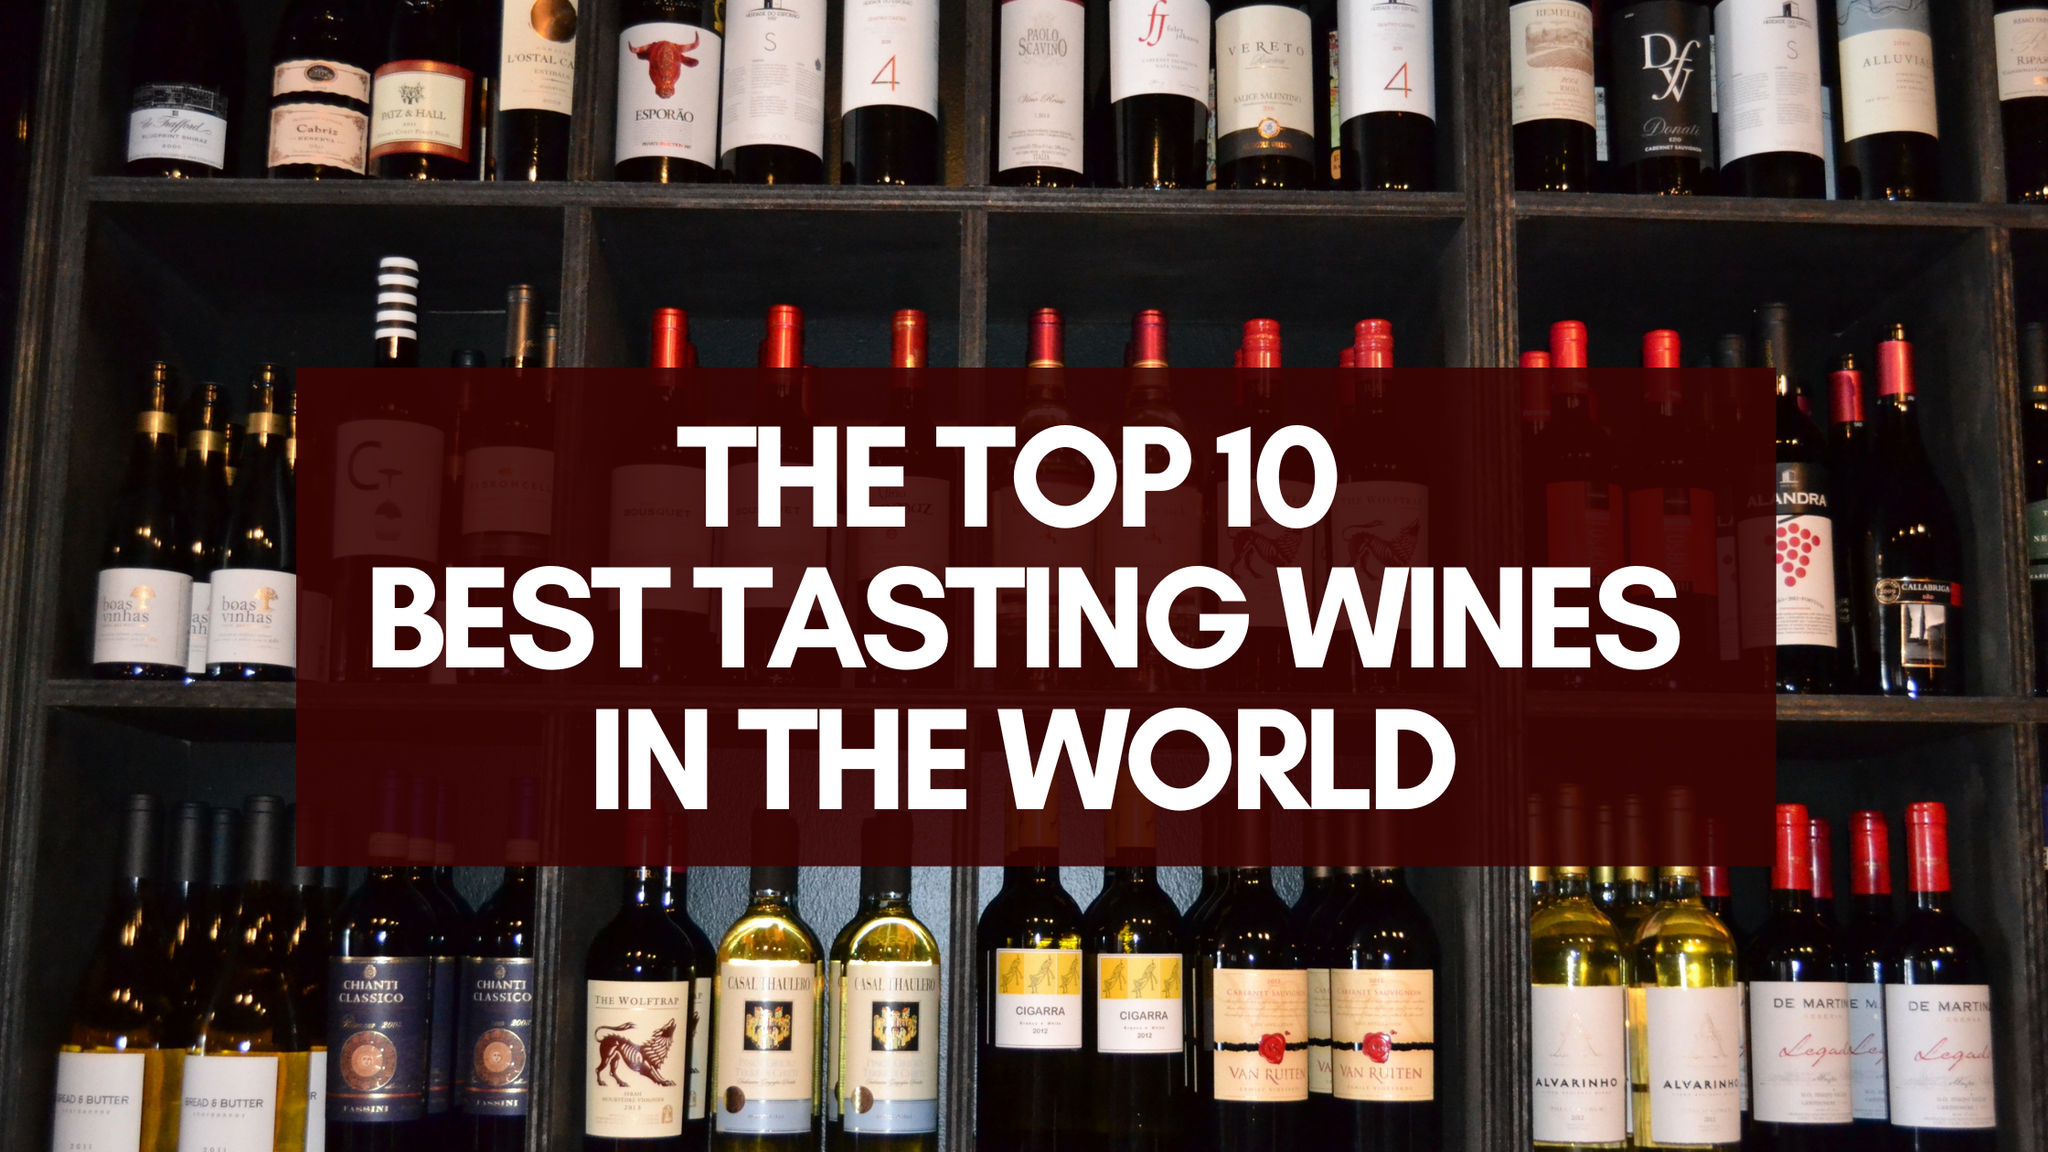 The Top 10 Best Tasting Wines in the World